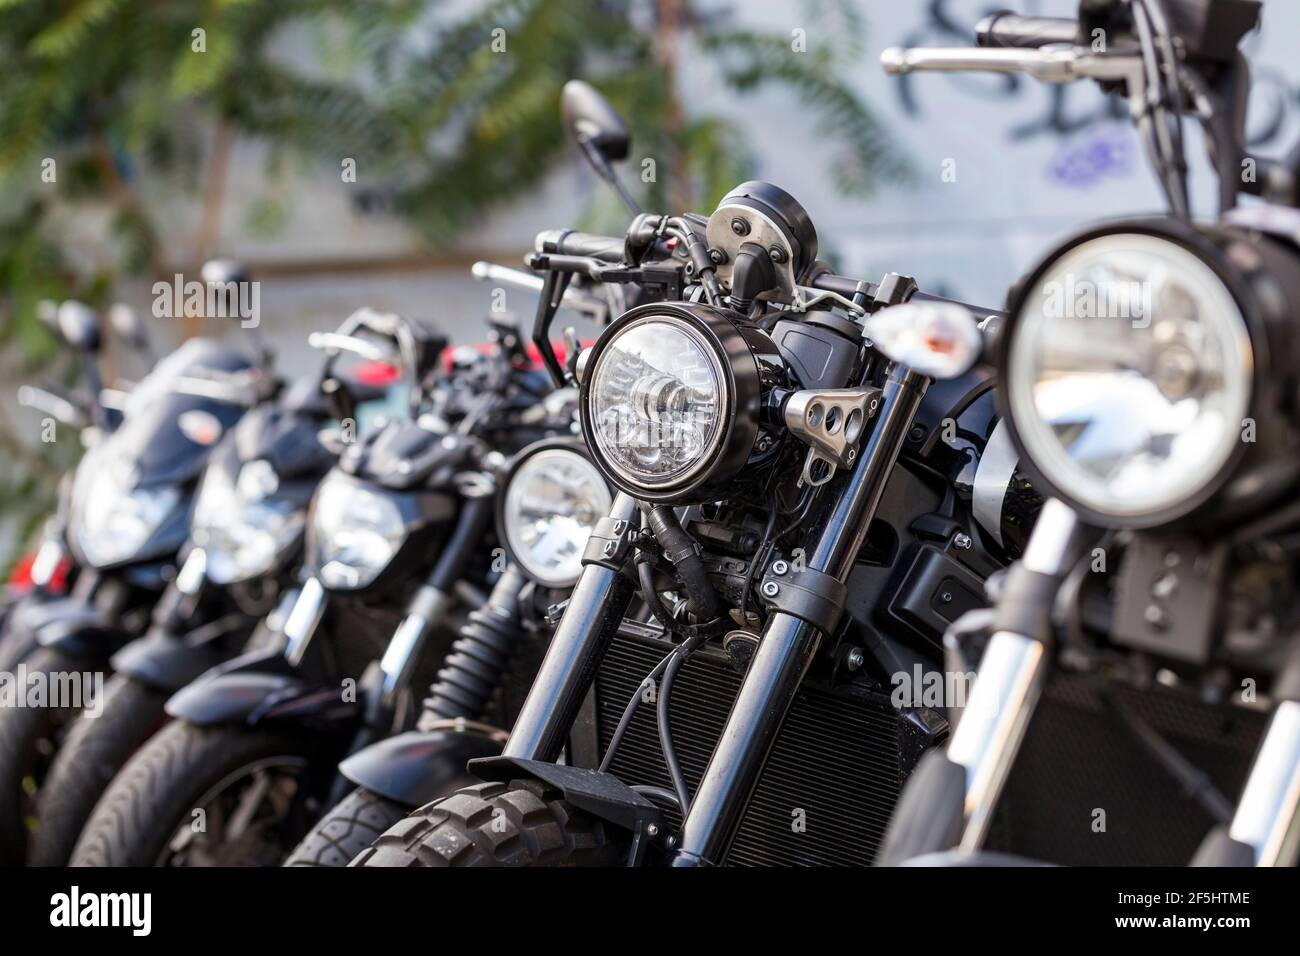 Several motorcycles for sale. Detail of cycles parked next to each other in a motorbike dealership. Stock Photo